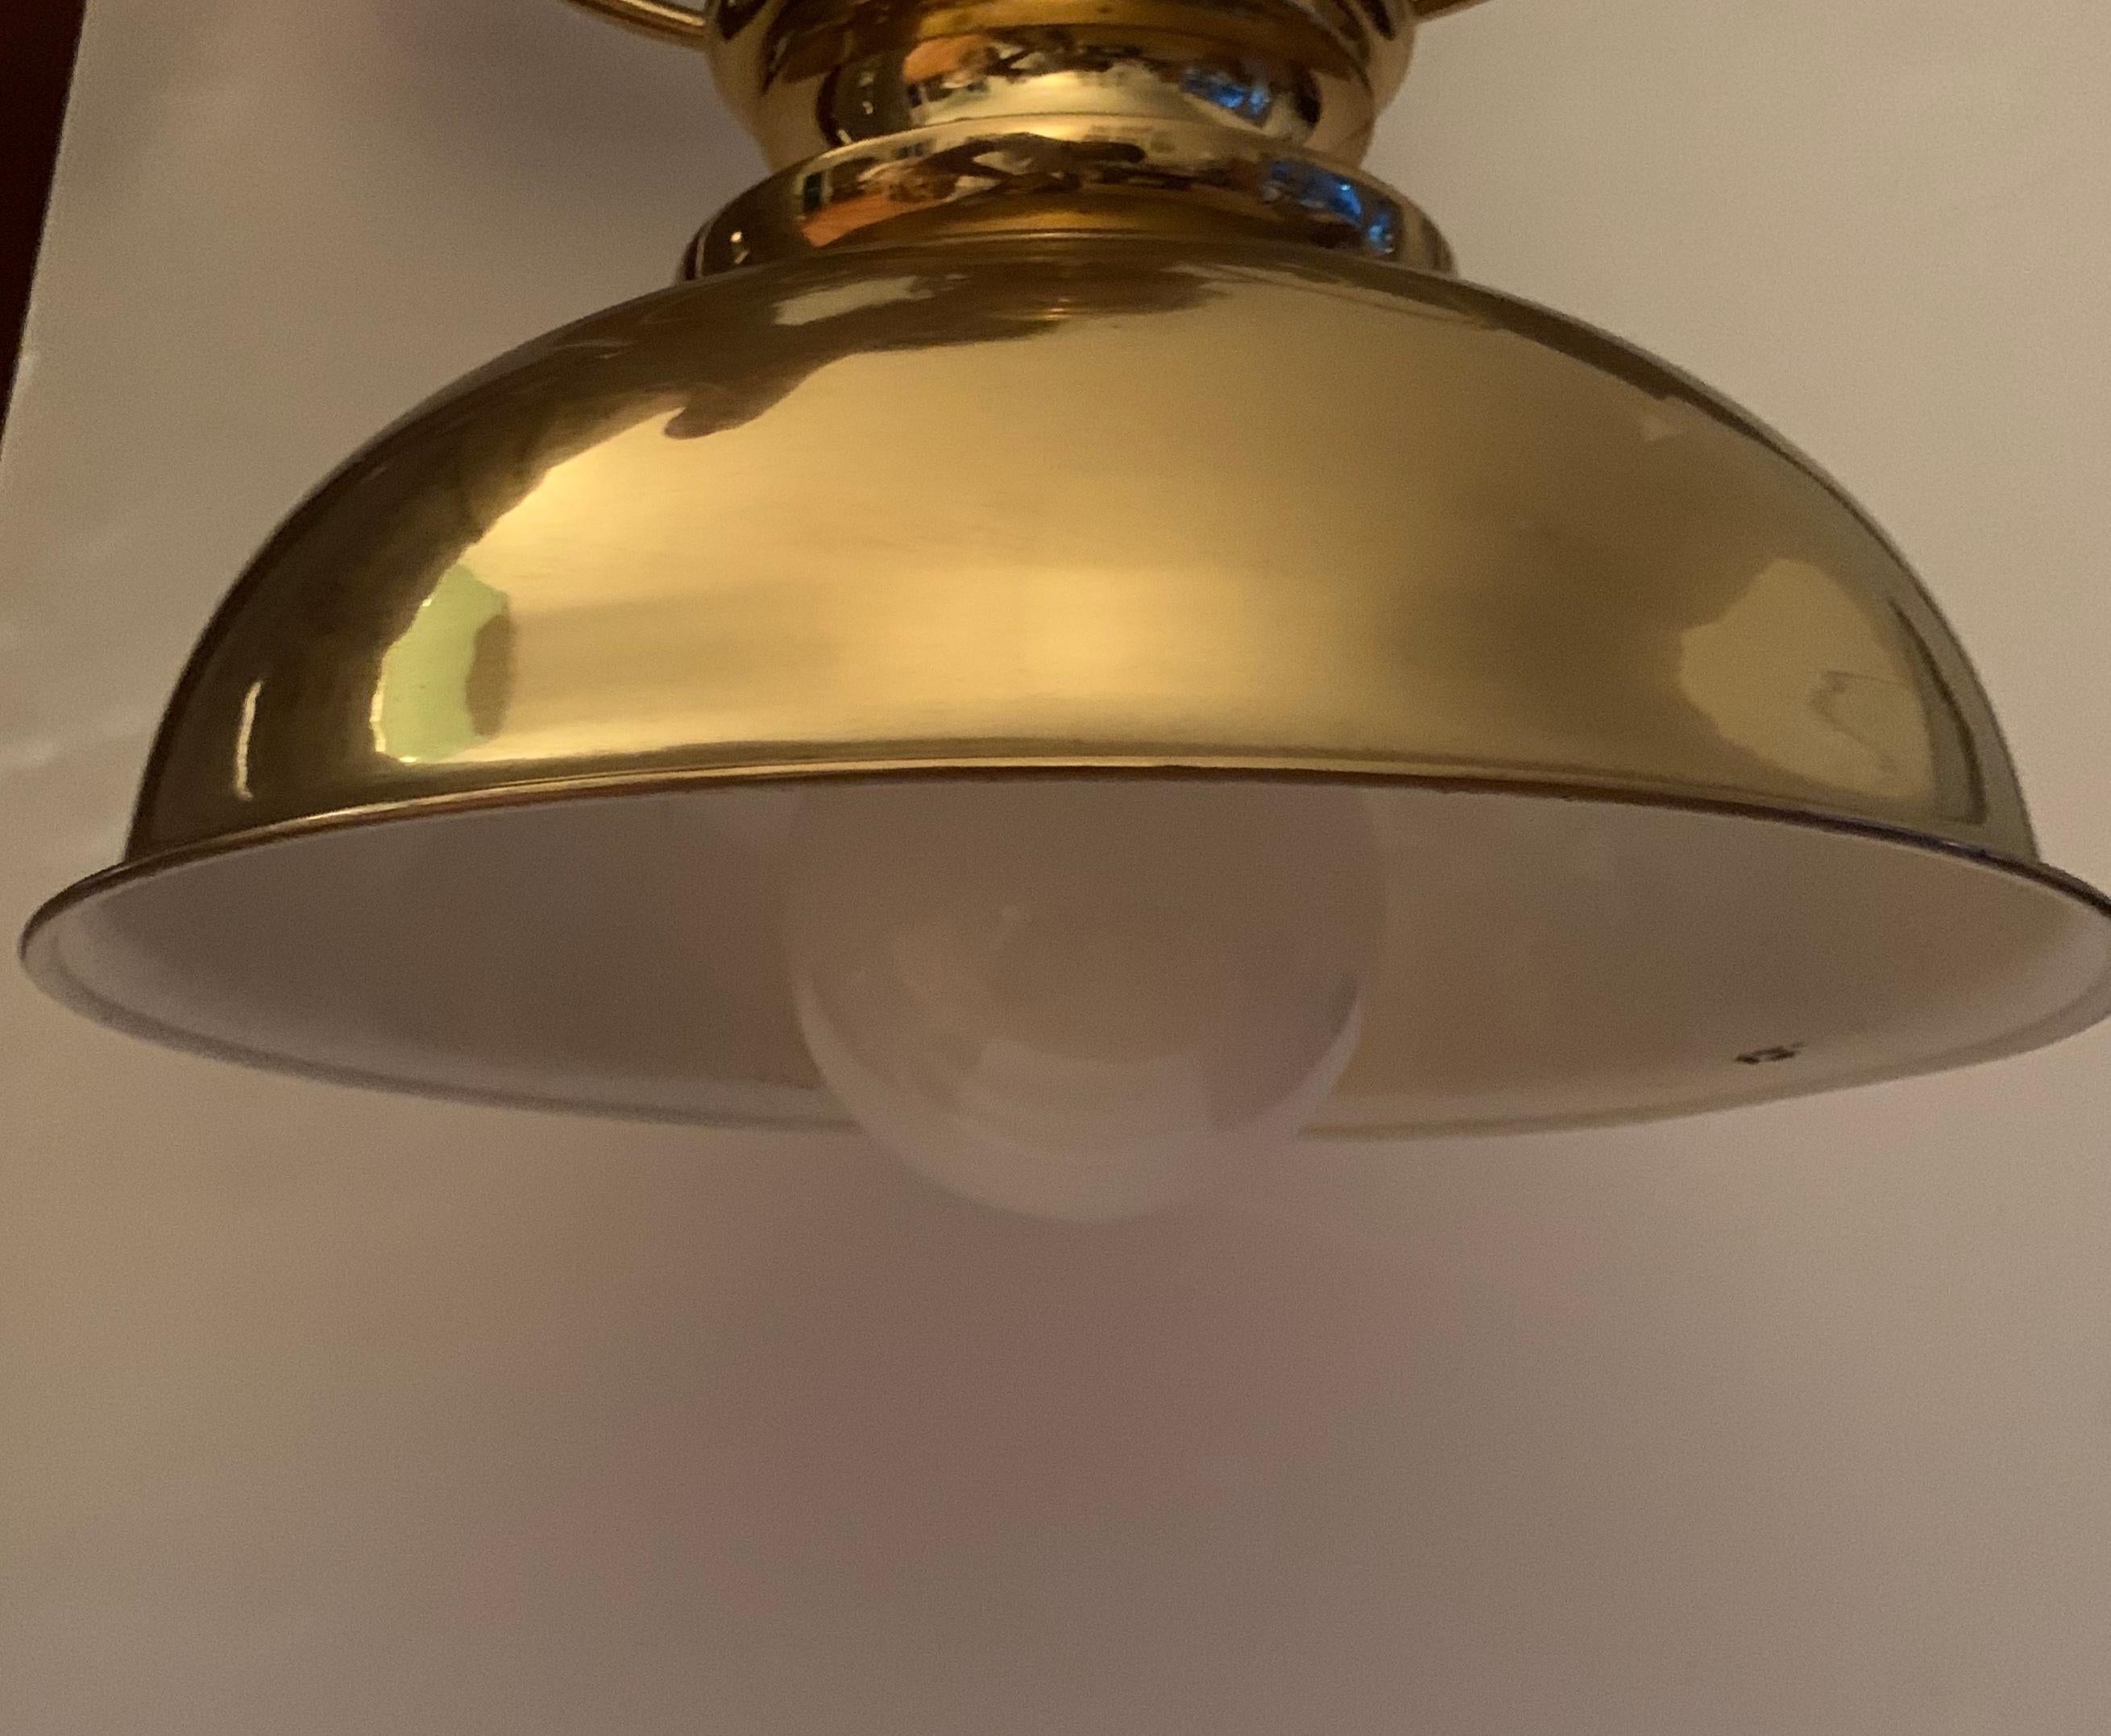 Late 20th Century Ralph Lauren Style Polished Brass Billiard Style Light Fixture For Sale